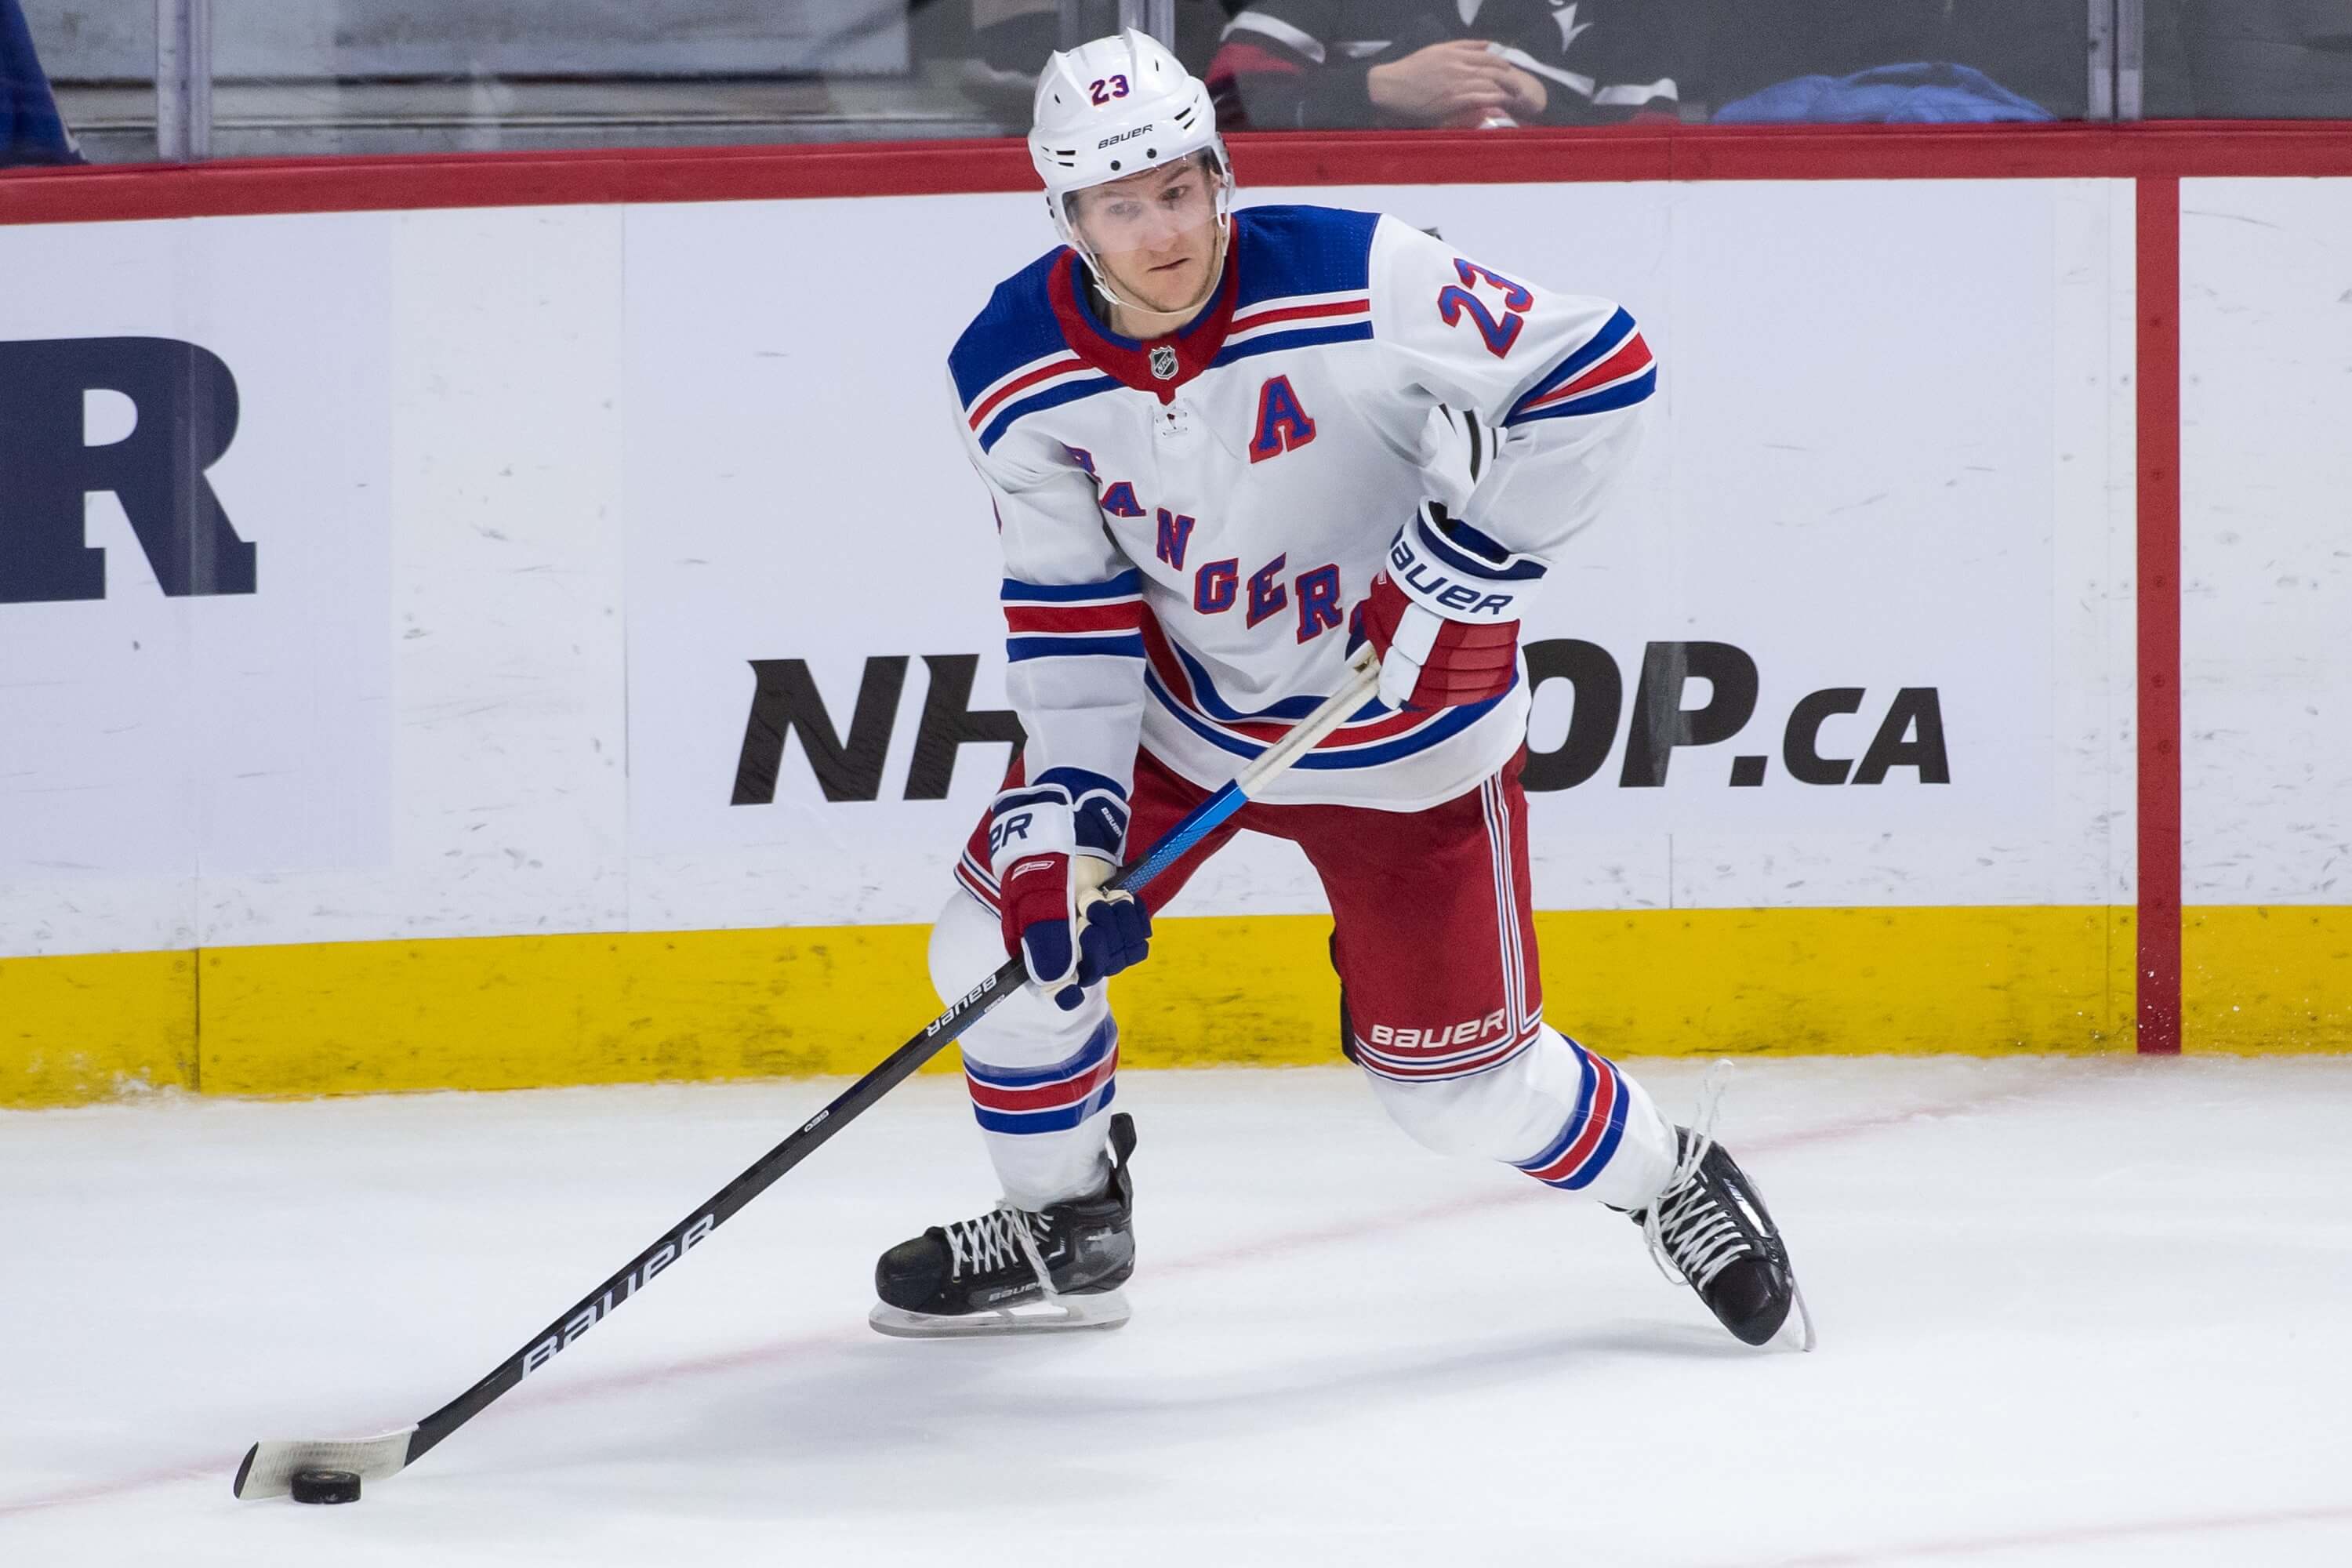 Stars vs Rangers Odds, Picks, and Predictions Tonight: Fox Helps Rangers Stay Hot